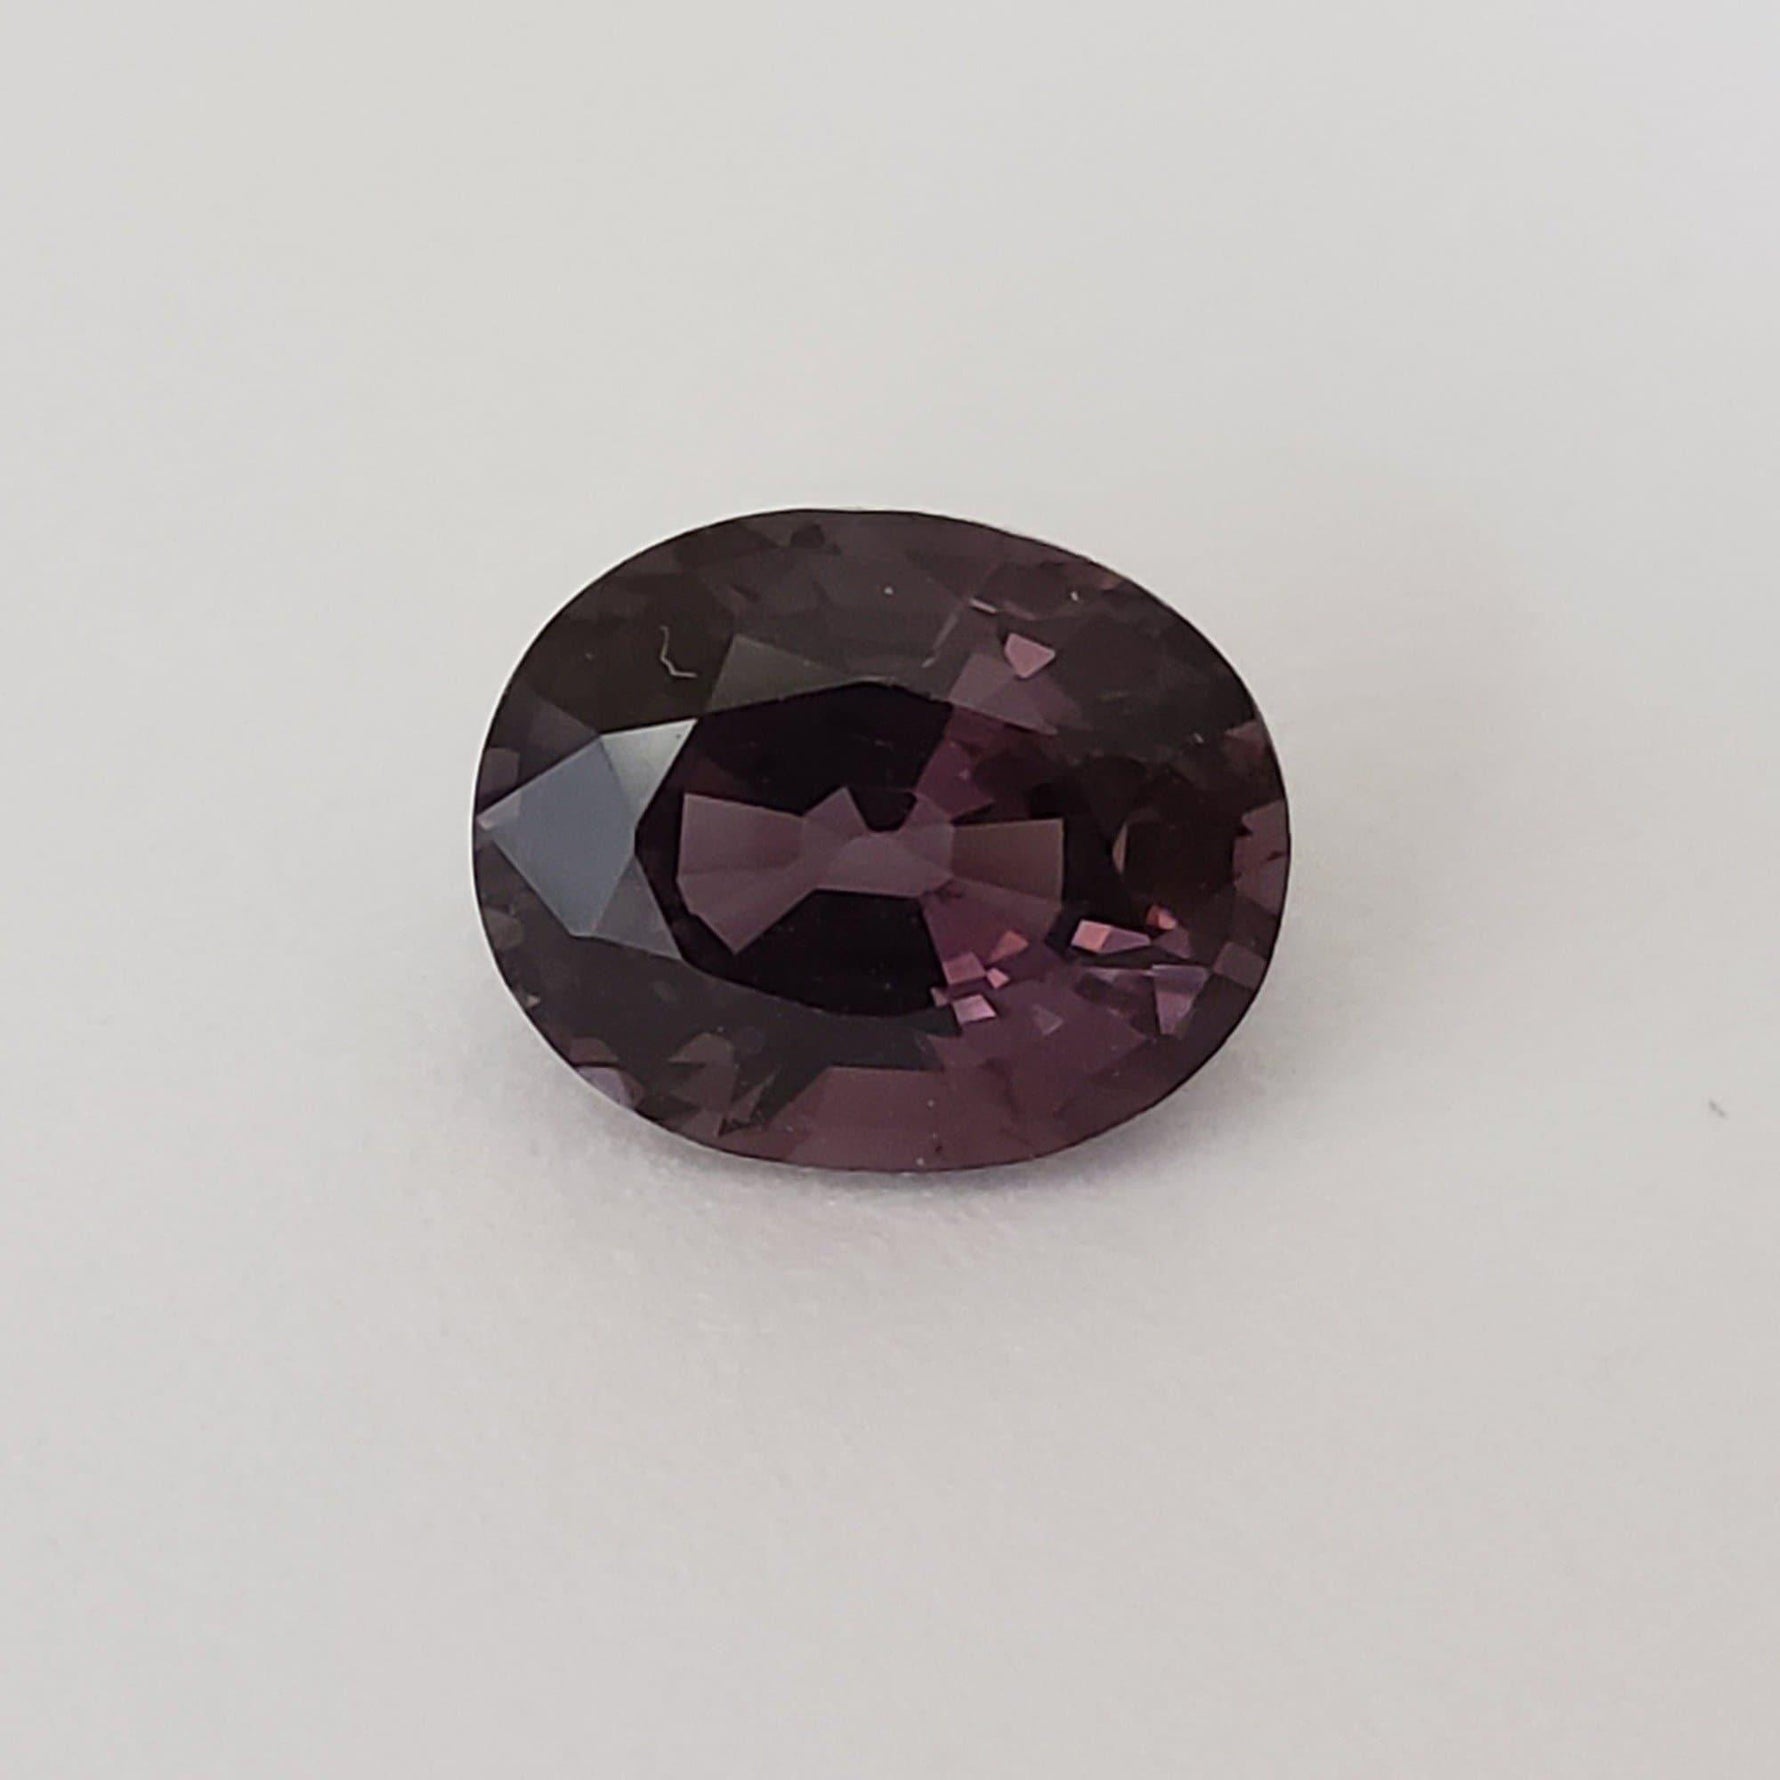 Spinel | Oval Cut | Deep Lavender Pink | Natural | 9.1x7.5mm 2.77ct